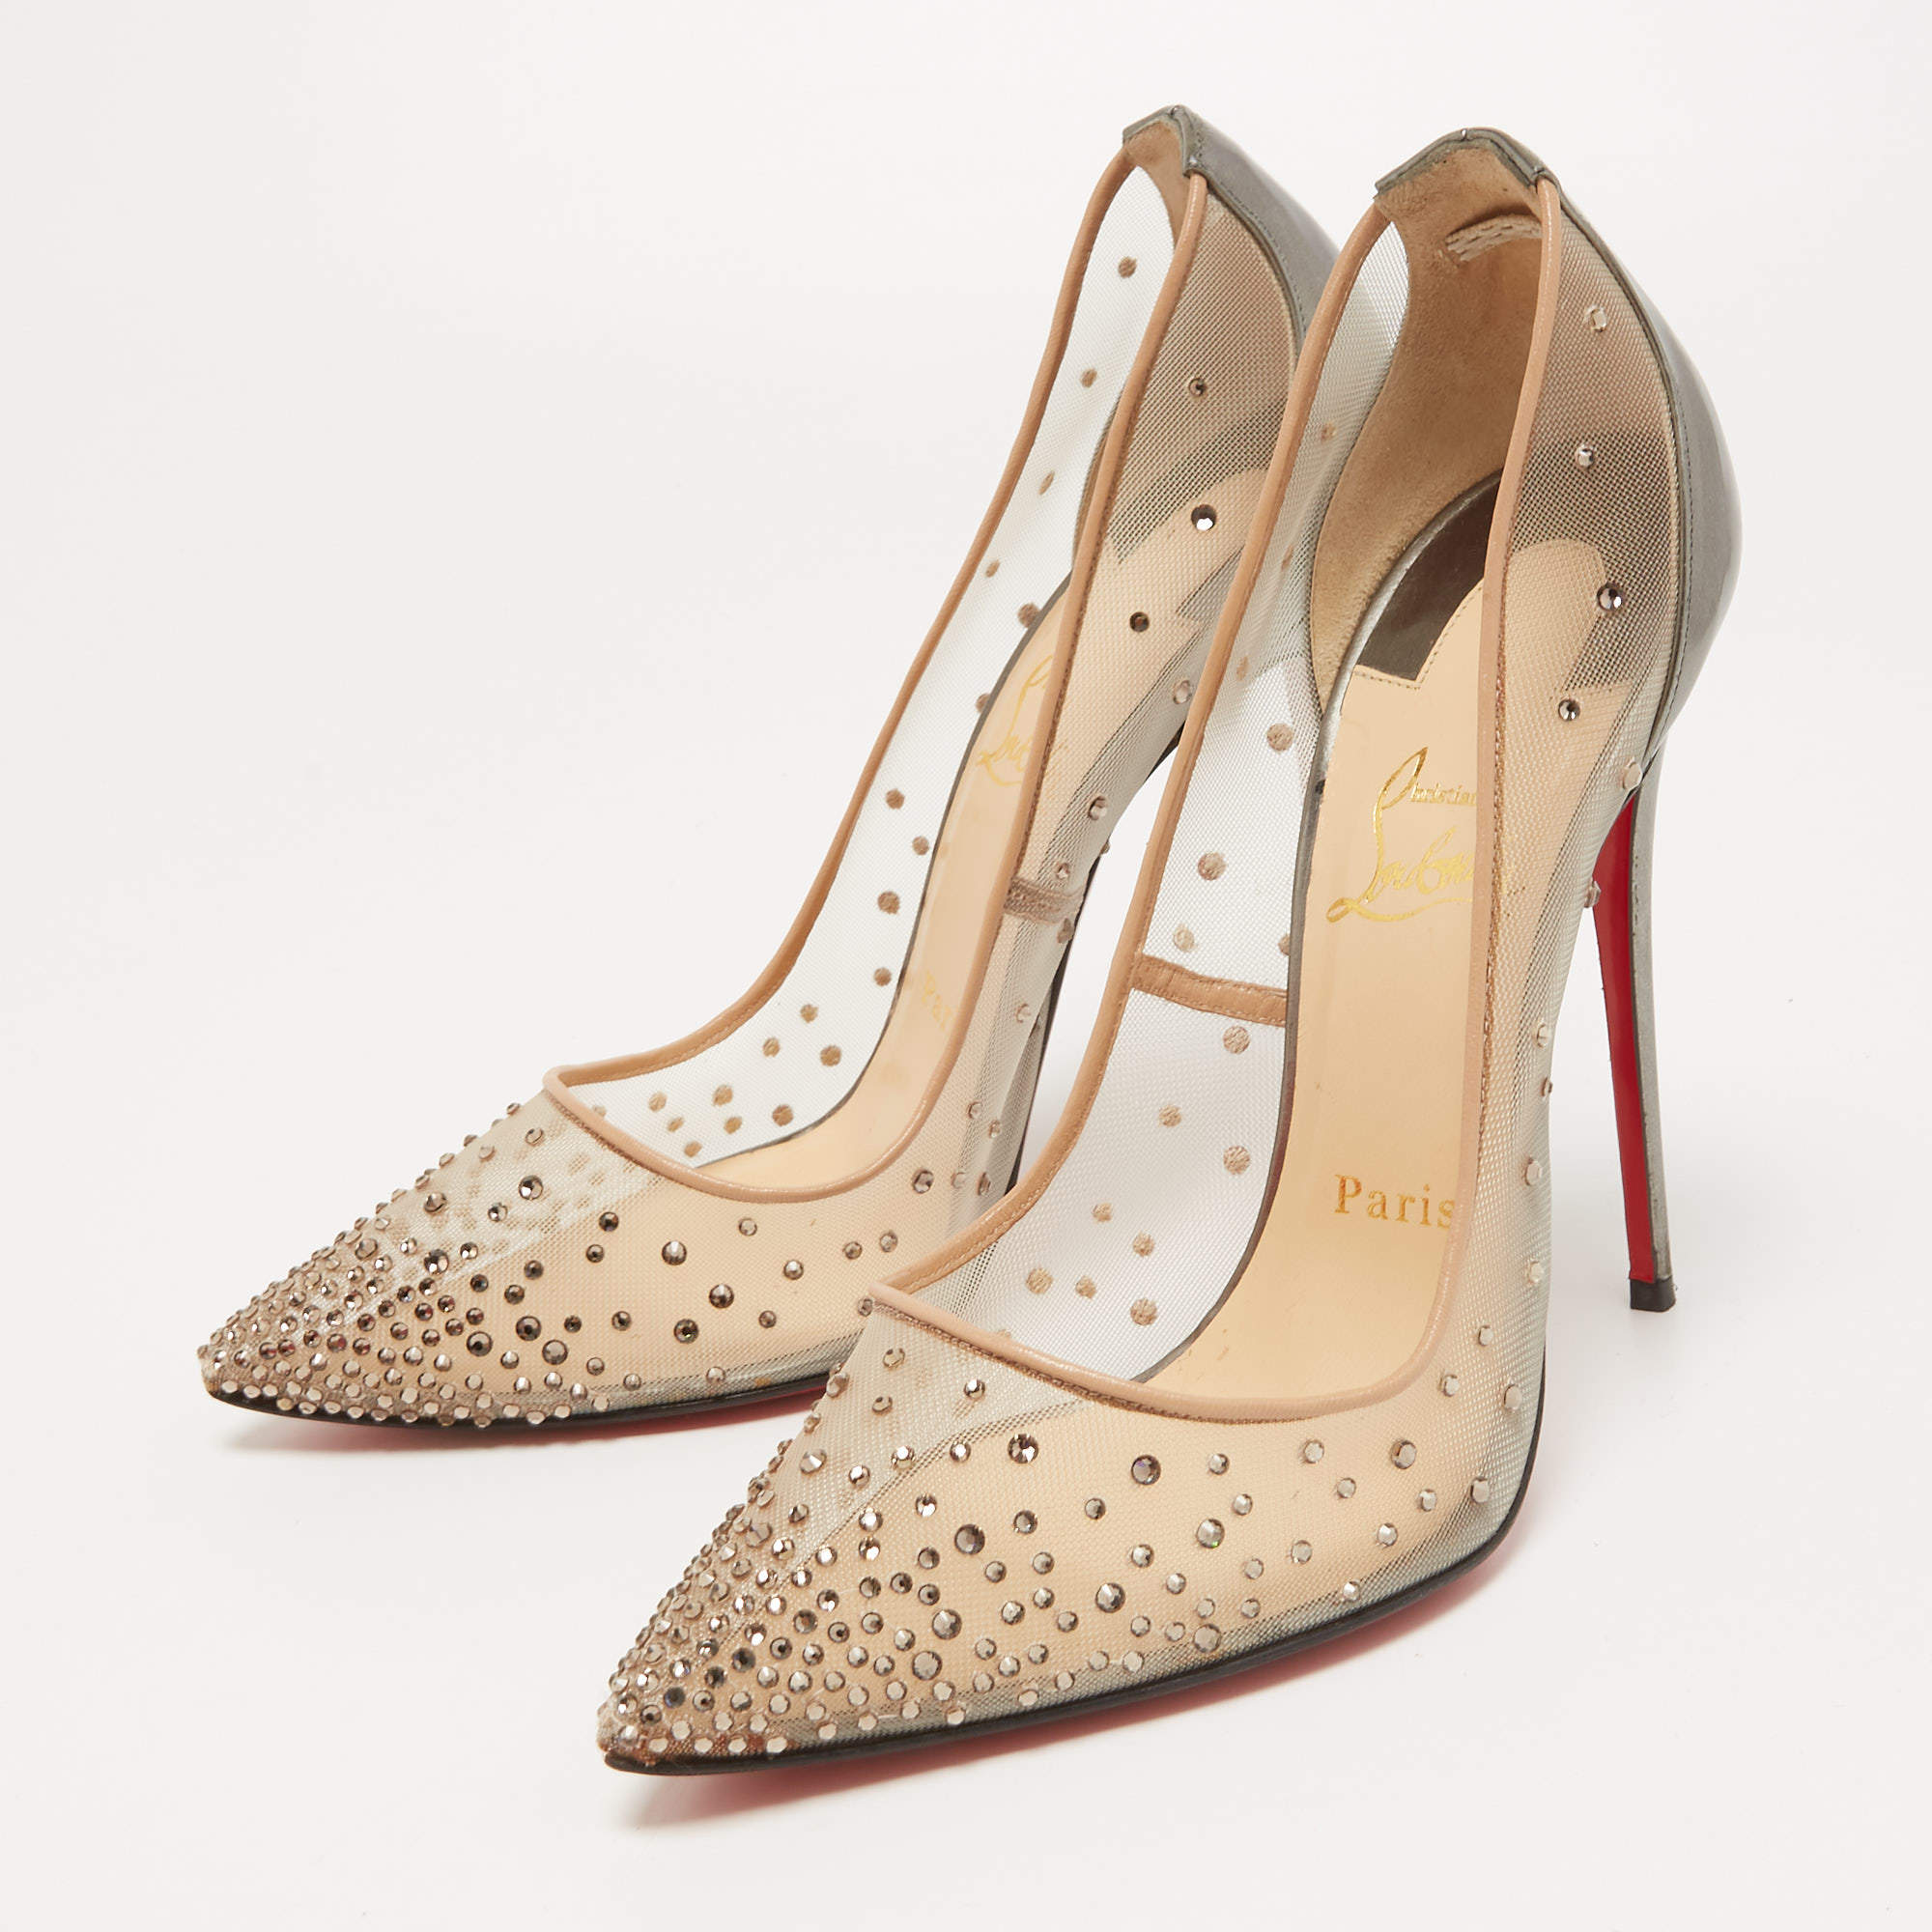 Christian Louboutin Beige Mesh and Leather Follies Strass Pumps Size 35